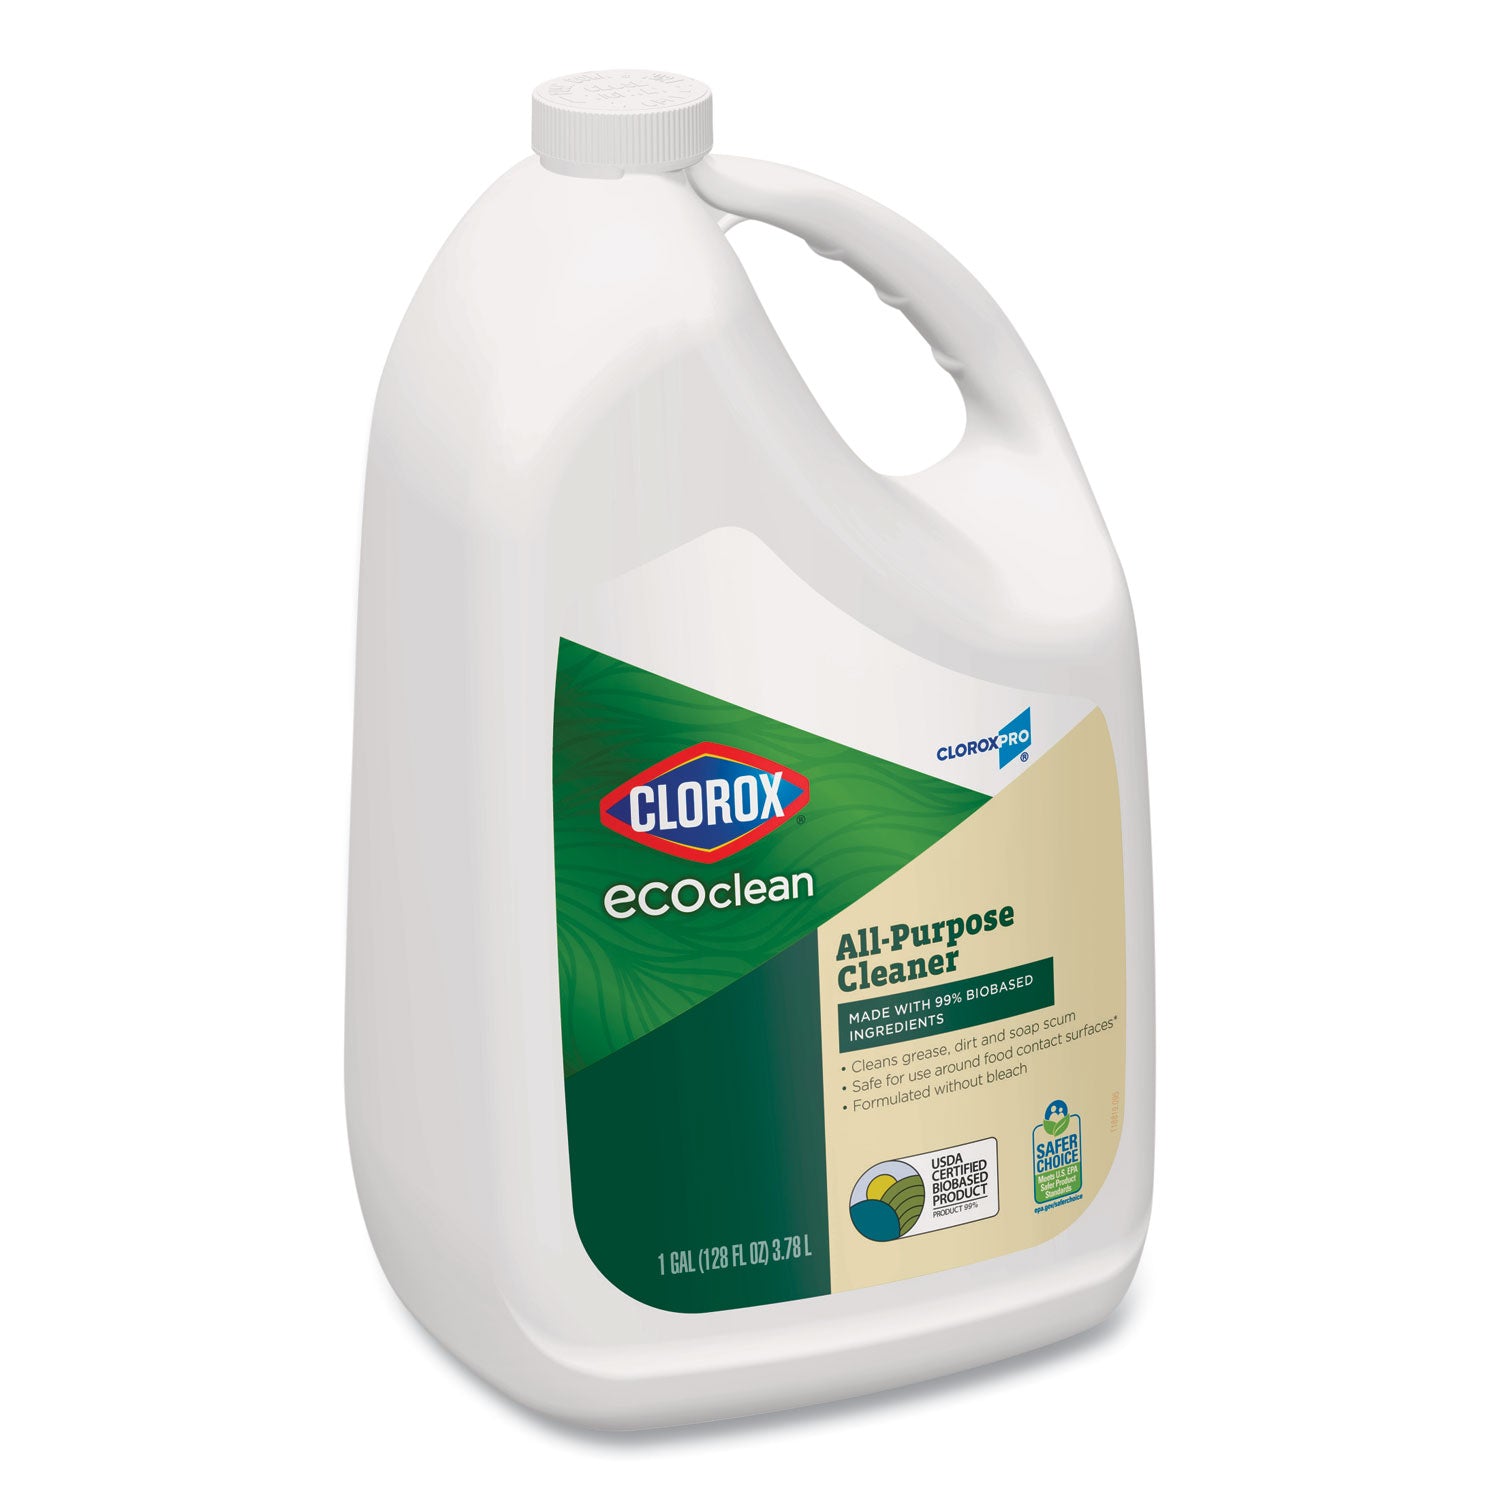 clorox-pro-ecoclean-all-purpose-cleaner-unscented-128-oz-bottle-4-carton_clo60278ct - 2